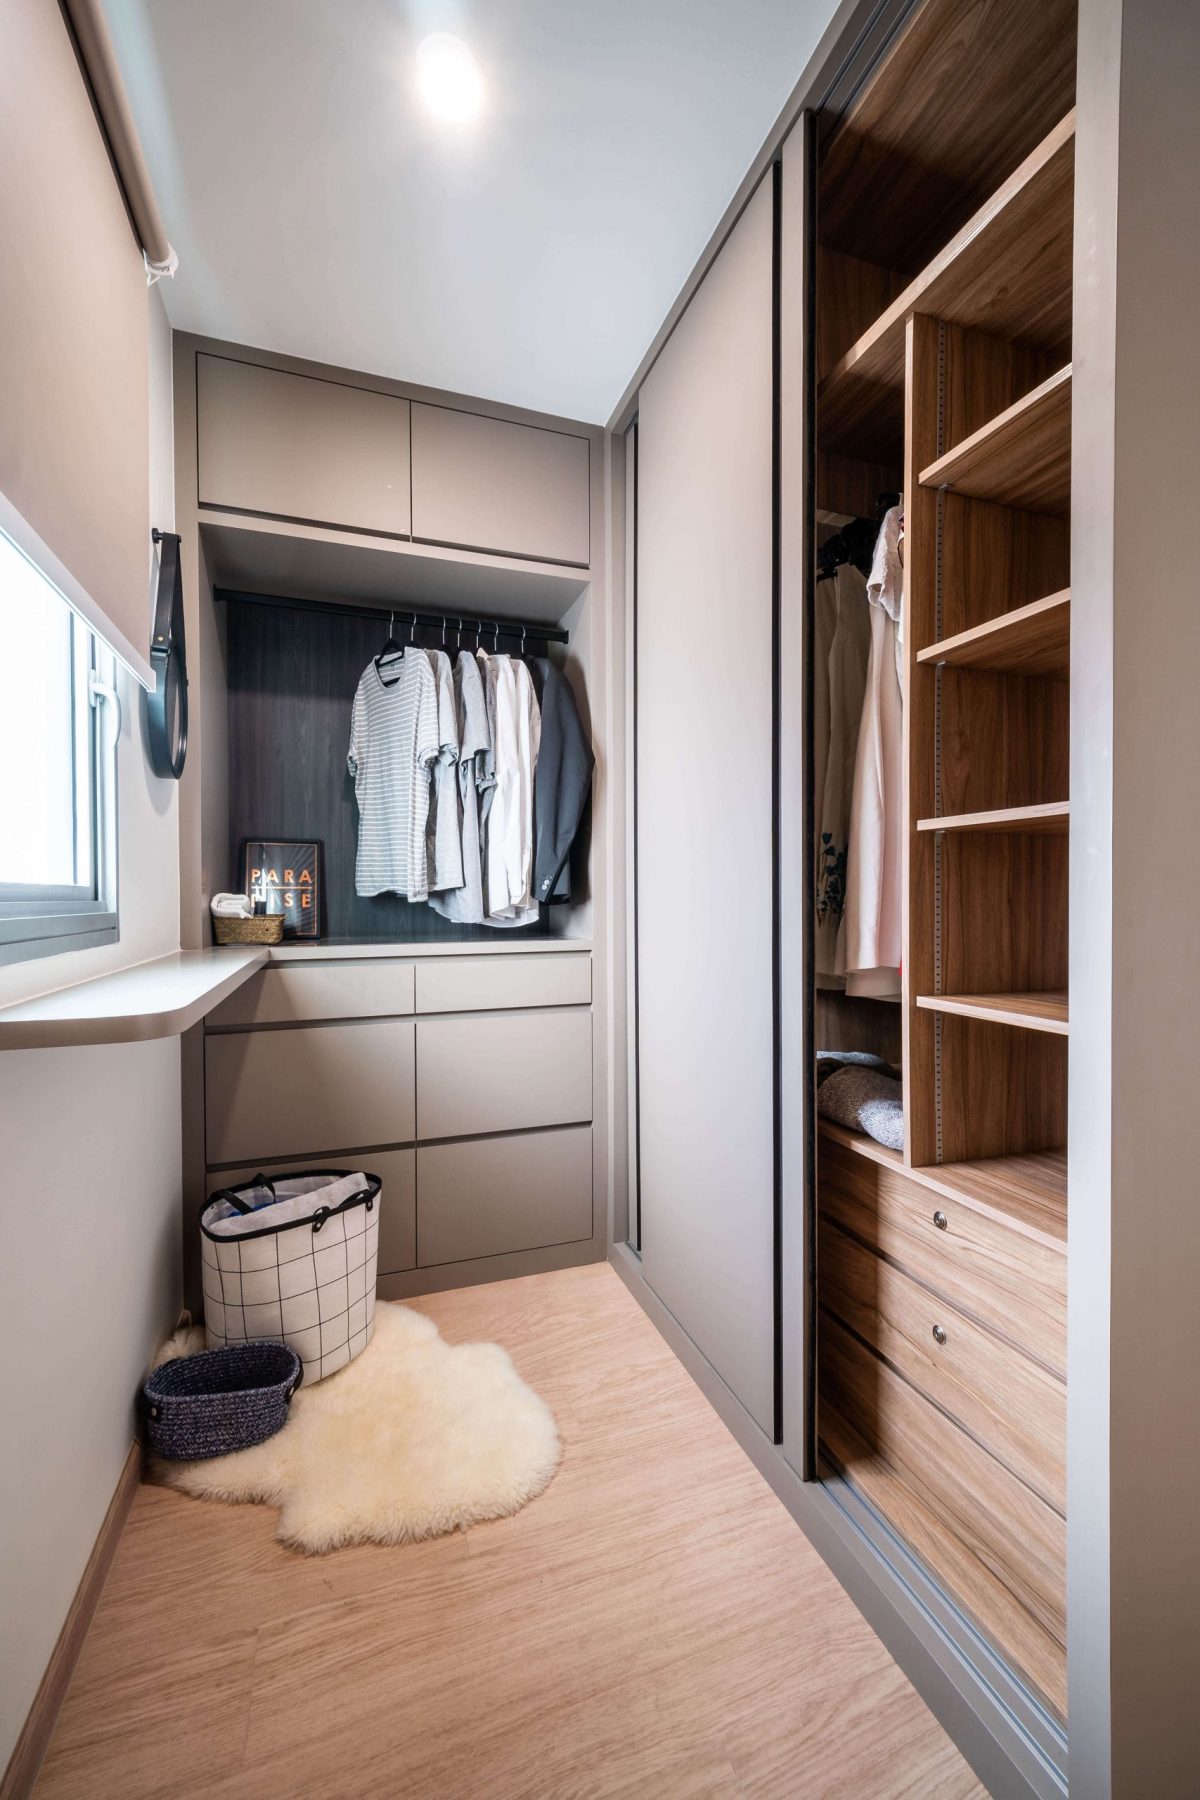 10 Things to Consider before Renovate a Built-in Wardrobe﻿